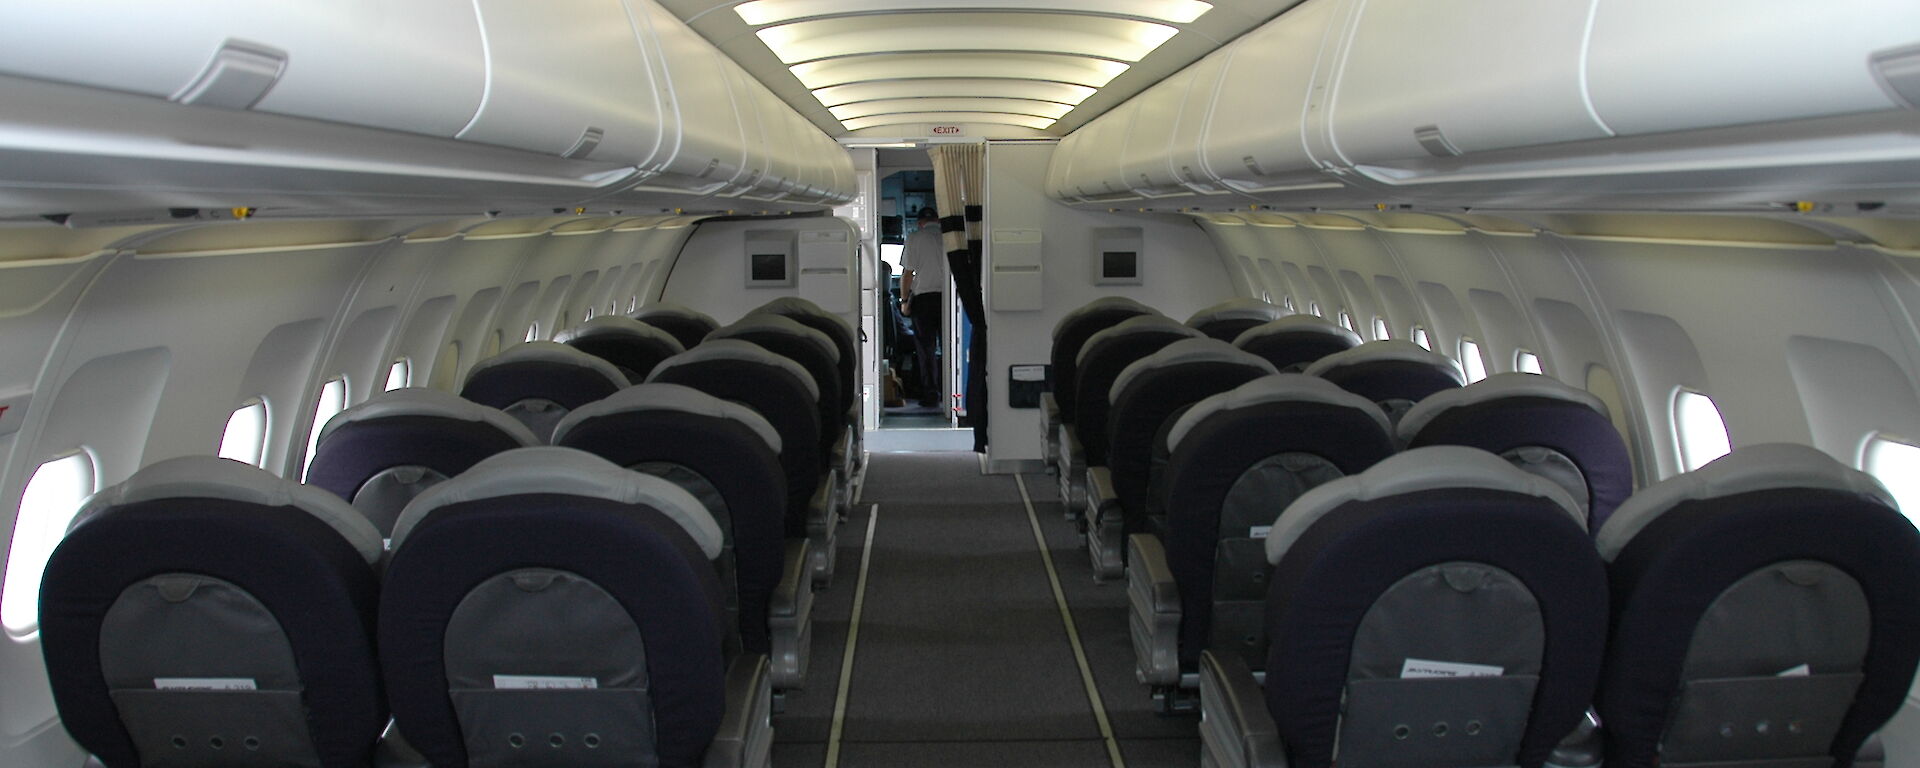 Rows of seats inside a small plane, three on each side with a row in the middle